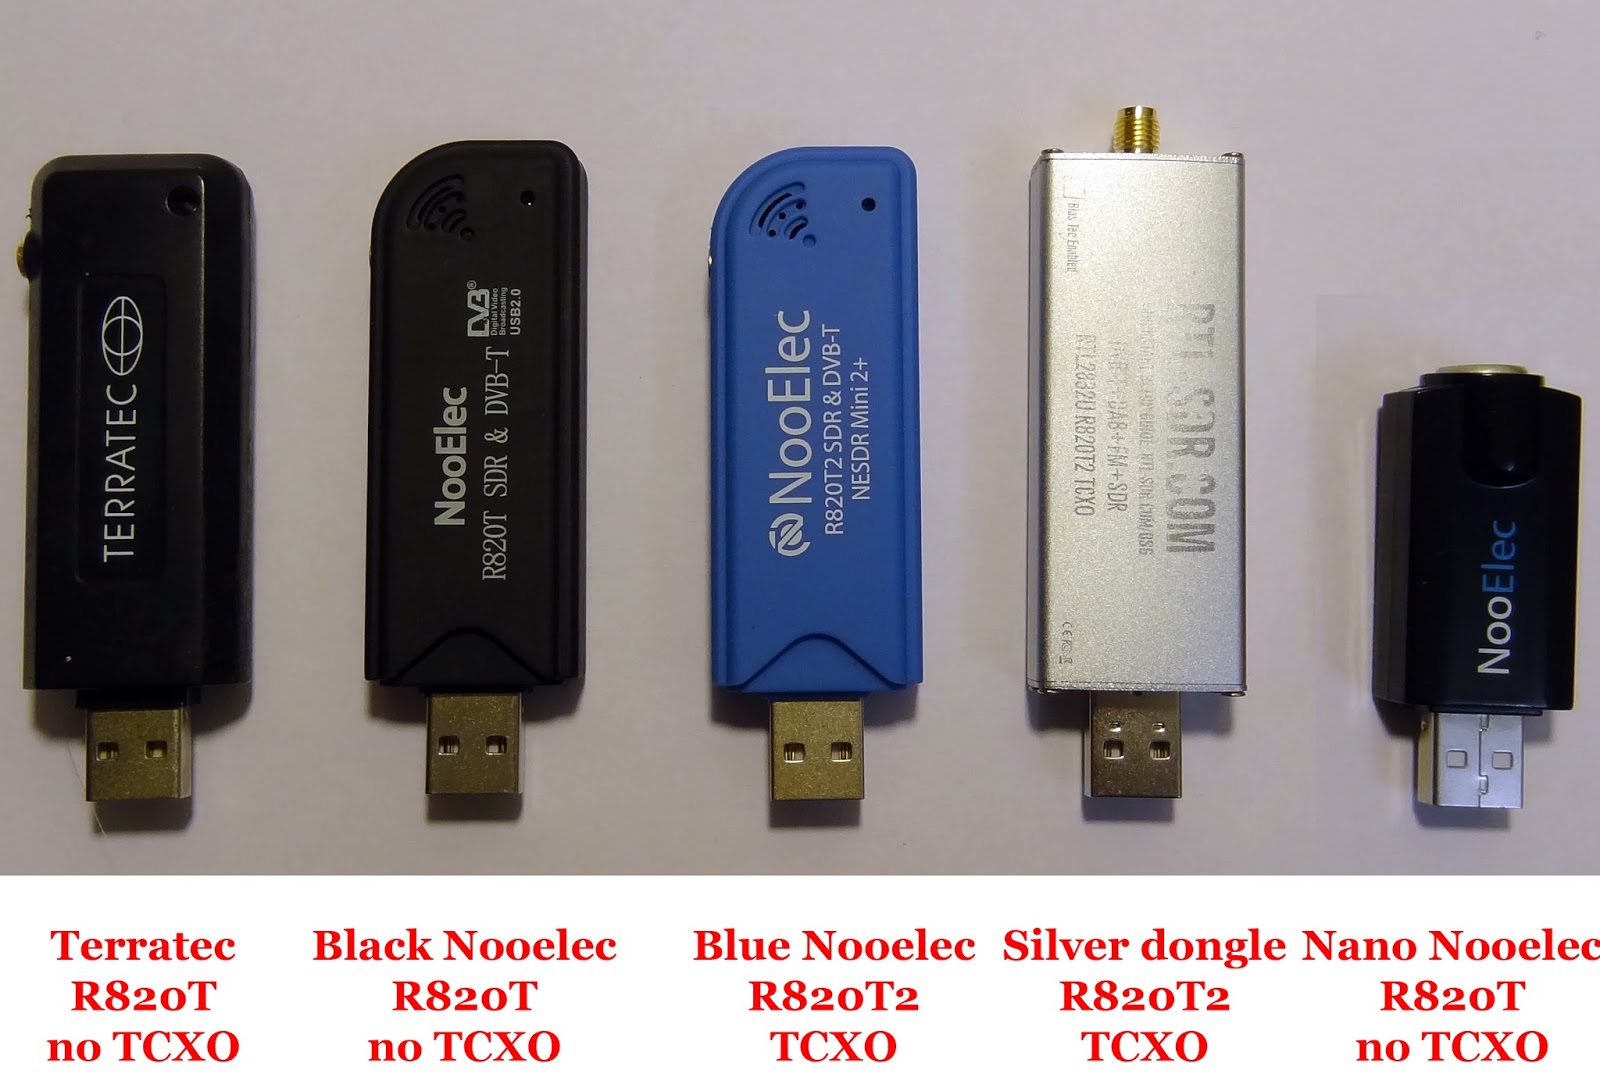 RTLSDR4Everyone: Review of 5 RTL-SDR Dongles